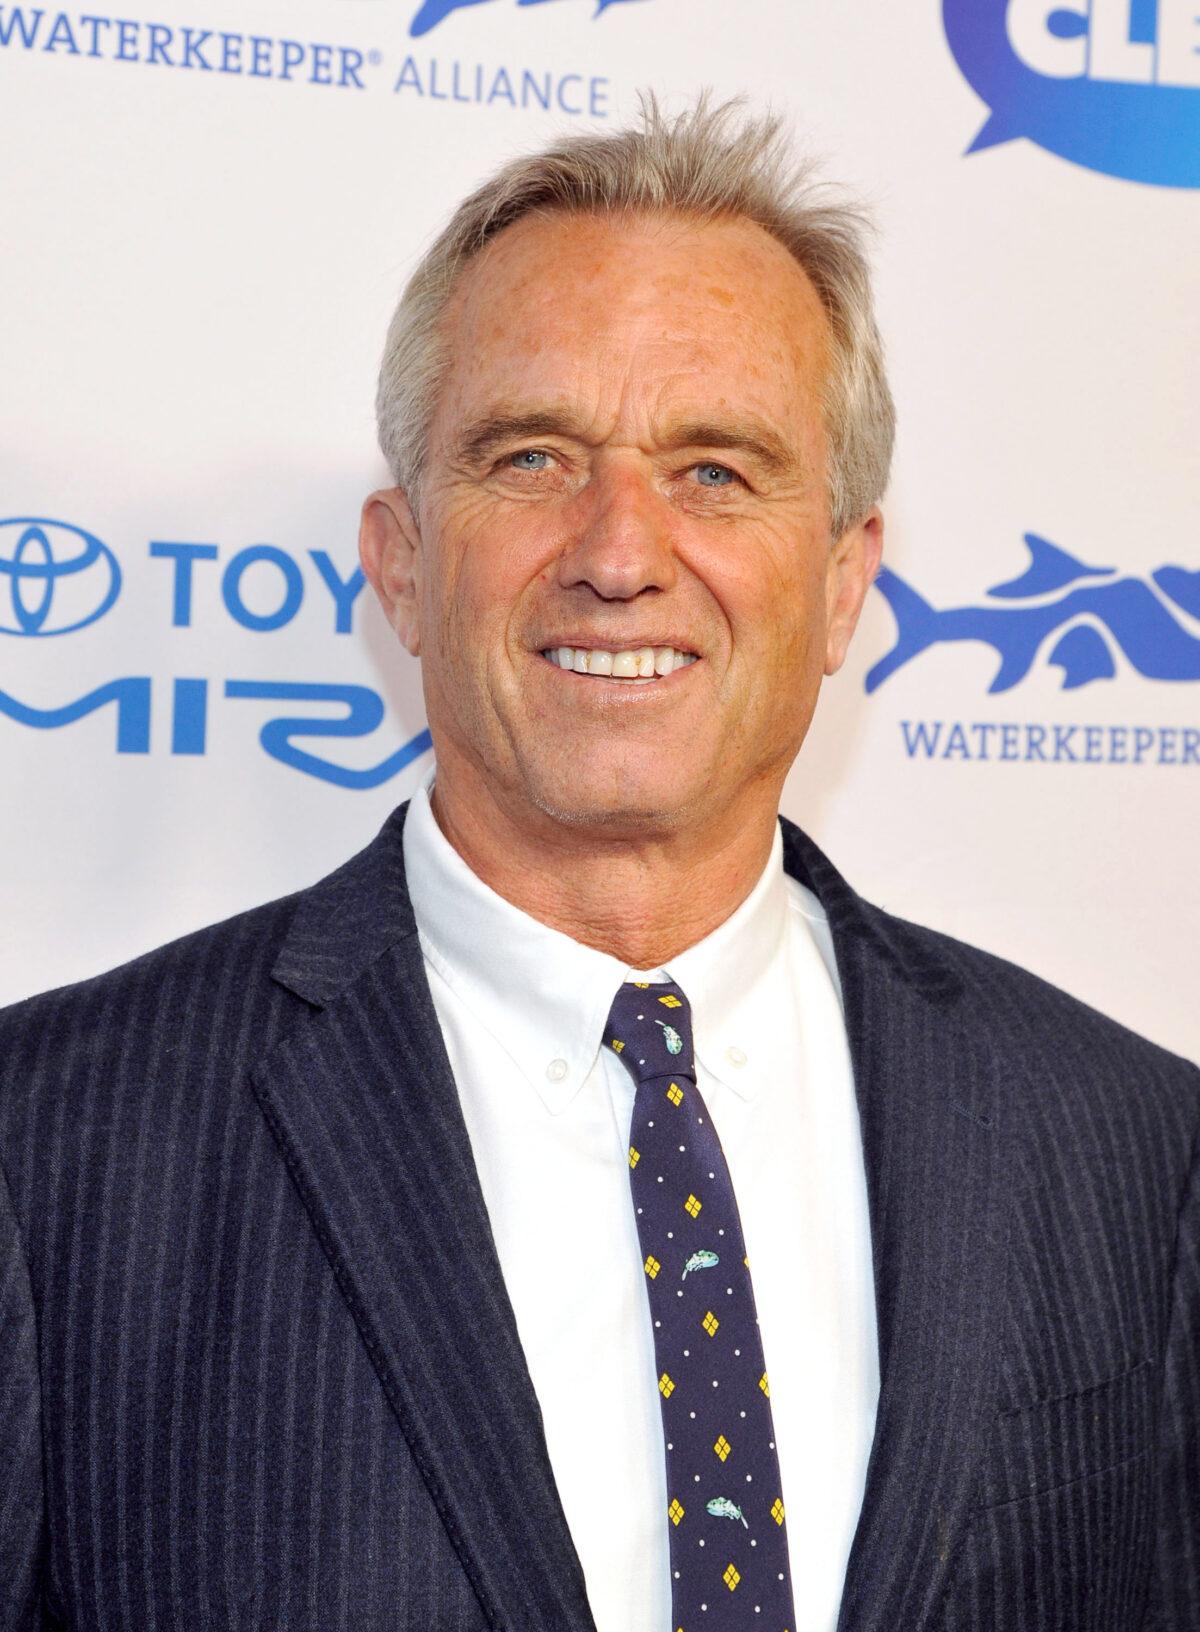 Robert F. Kennedy, Jr. attends Keep it Clean to benefit Waterkeeper Alliance on March 1, 2018 in Los Angeles, California. (John Sciulli/Getty Images for Waterkeeper Alliance)